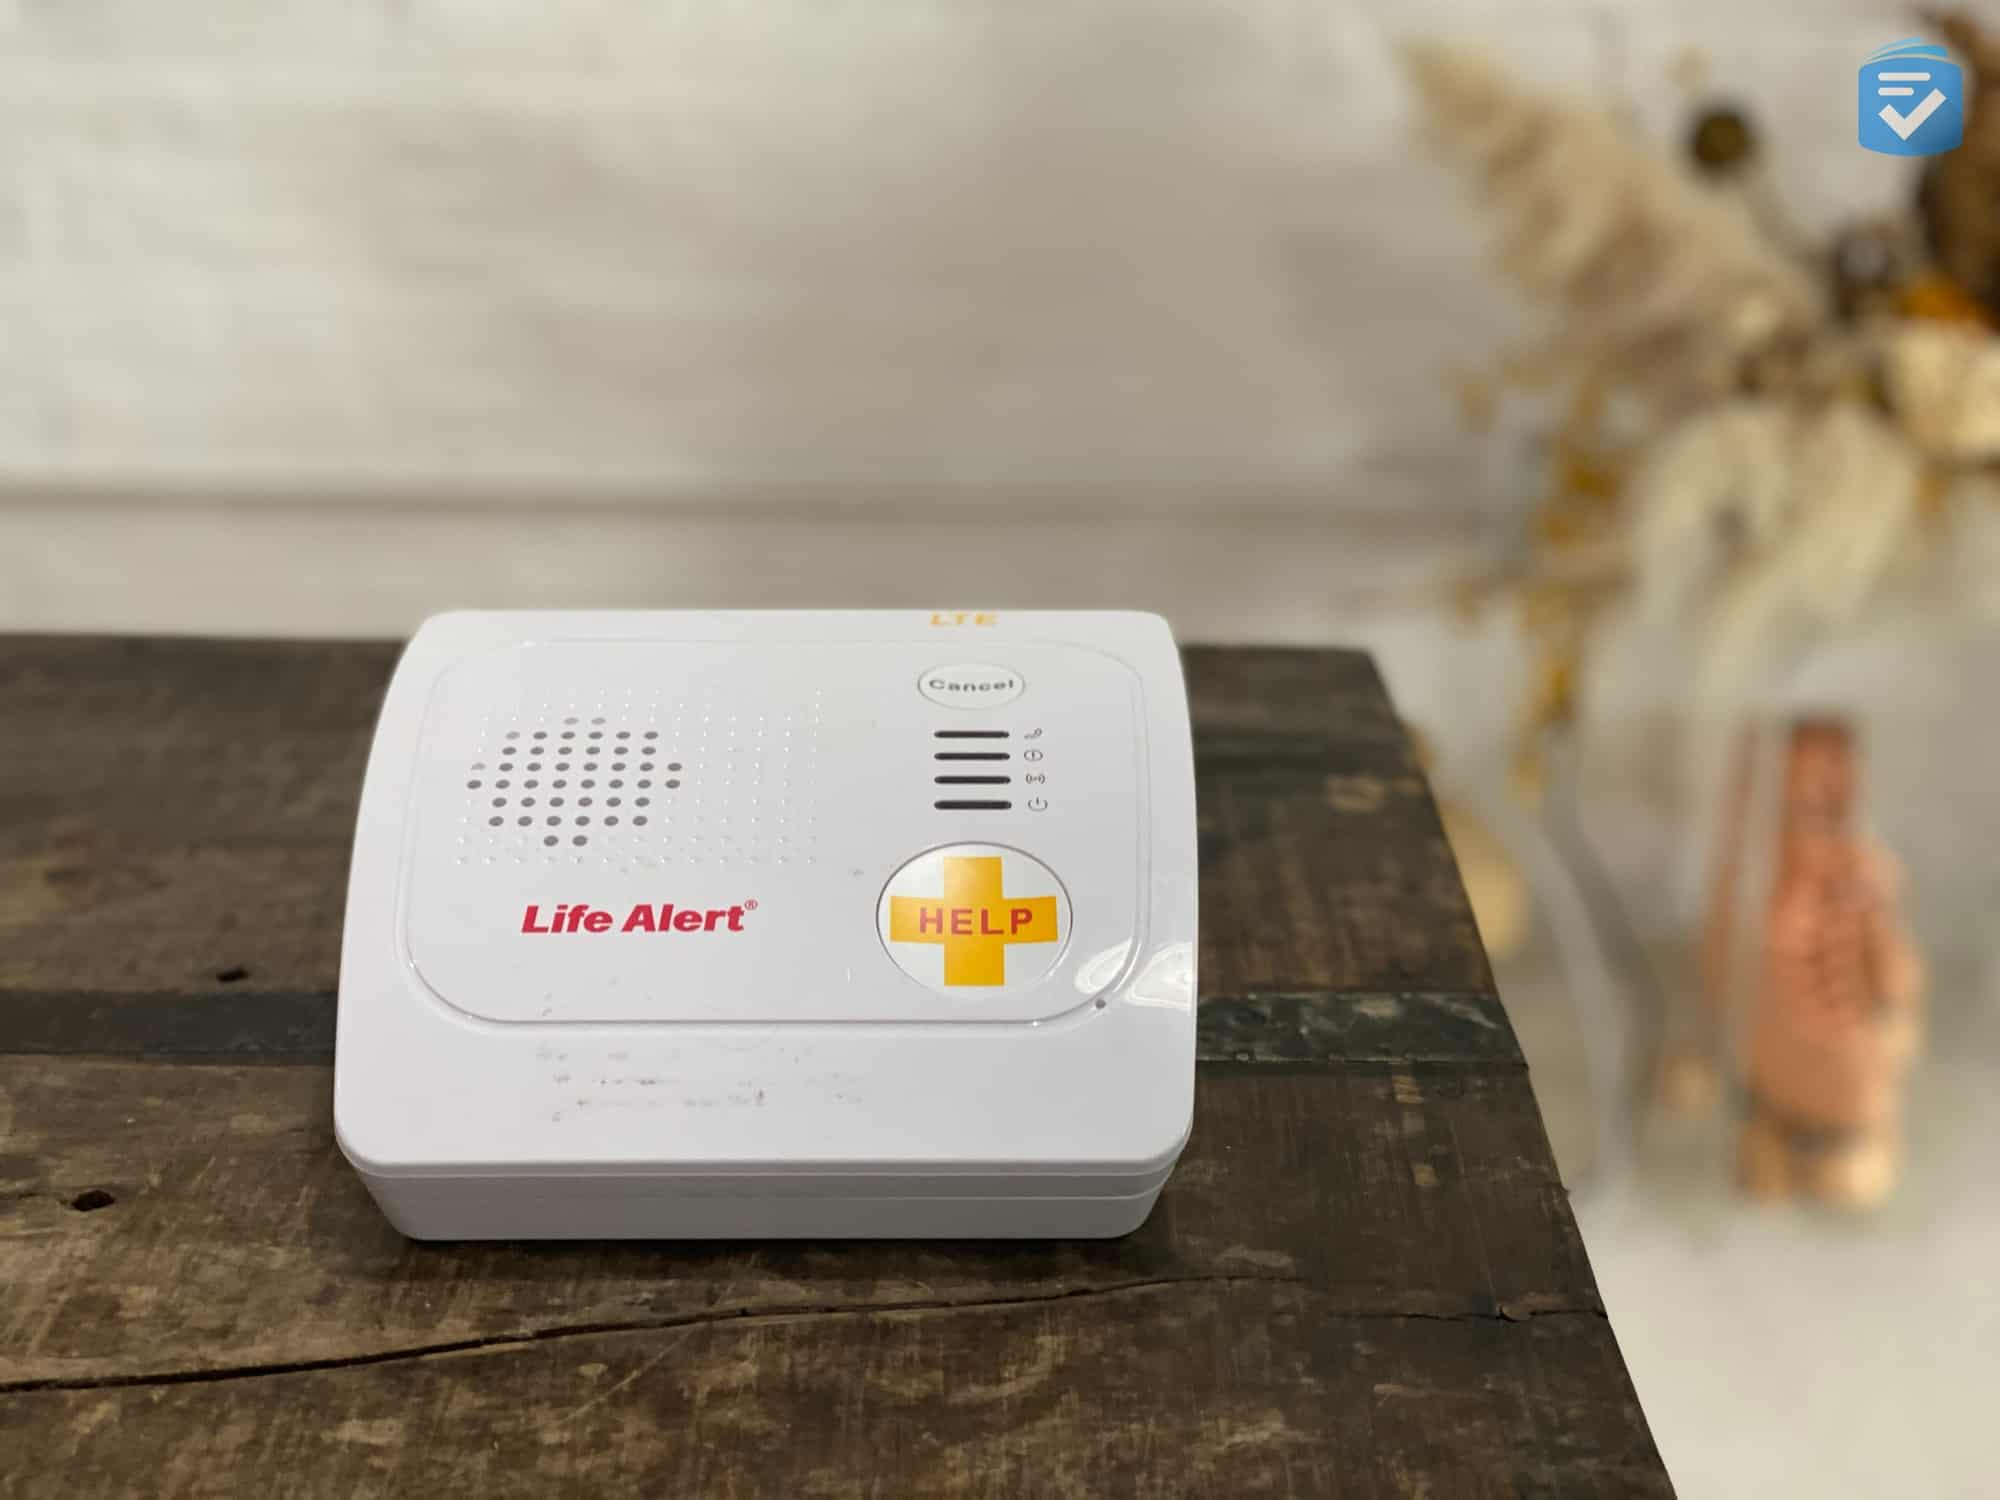 The Life Alert base unit features a built-in help button, microphone, and speaker.